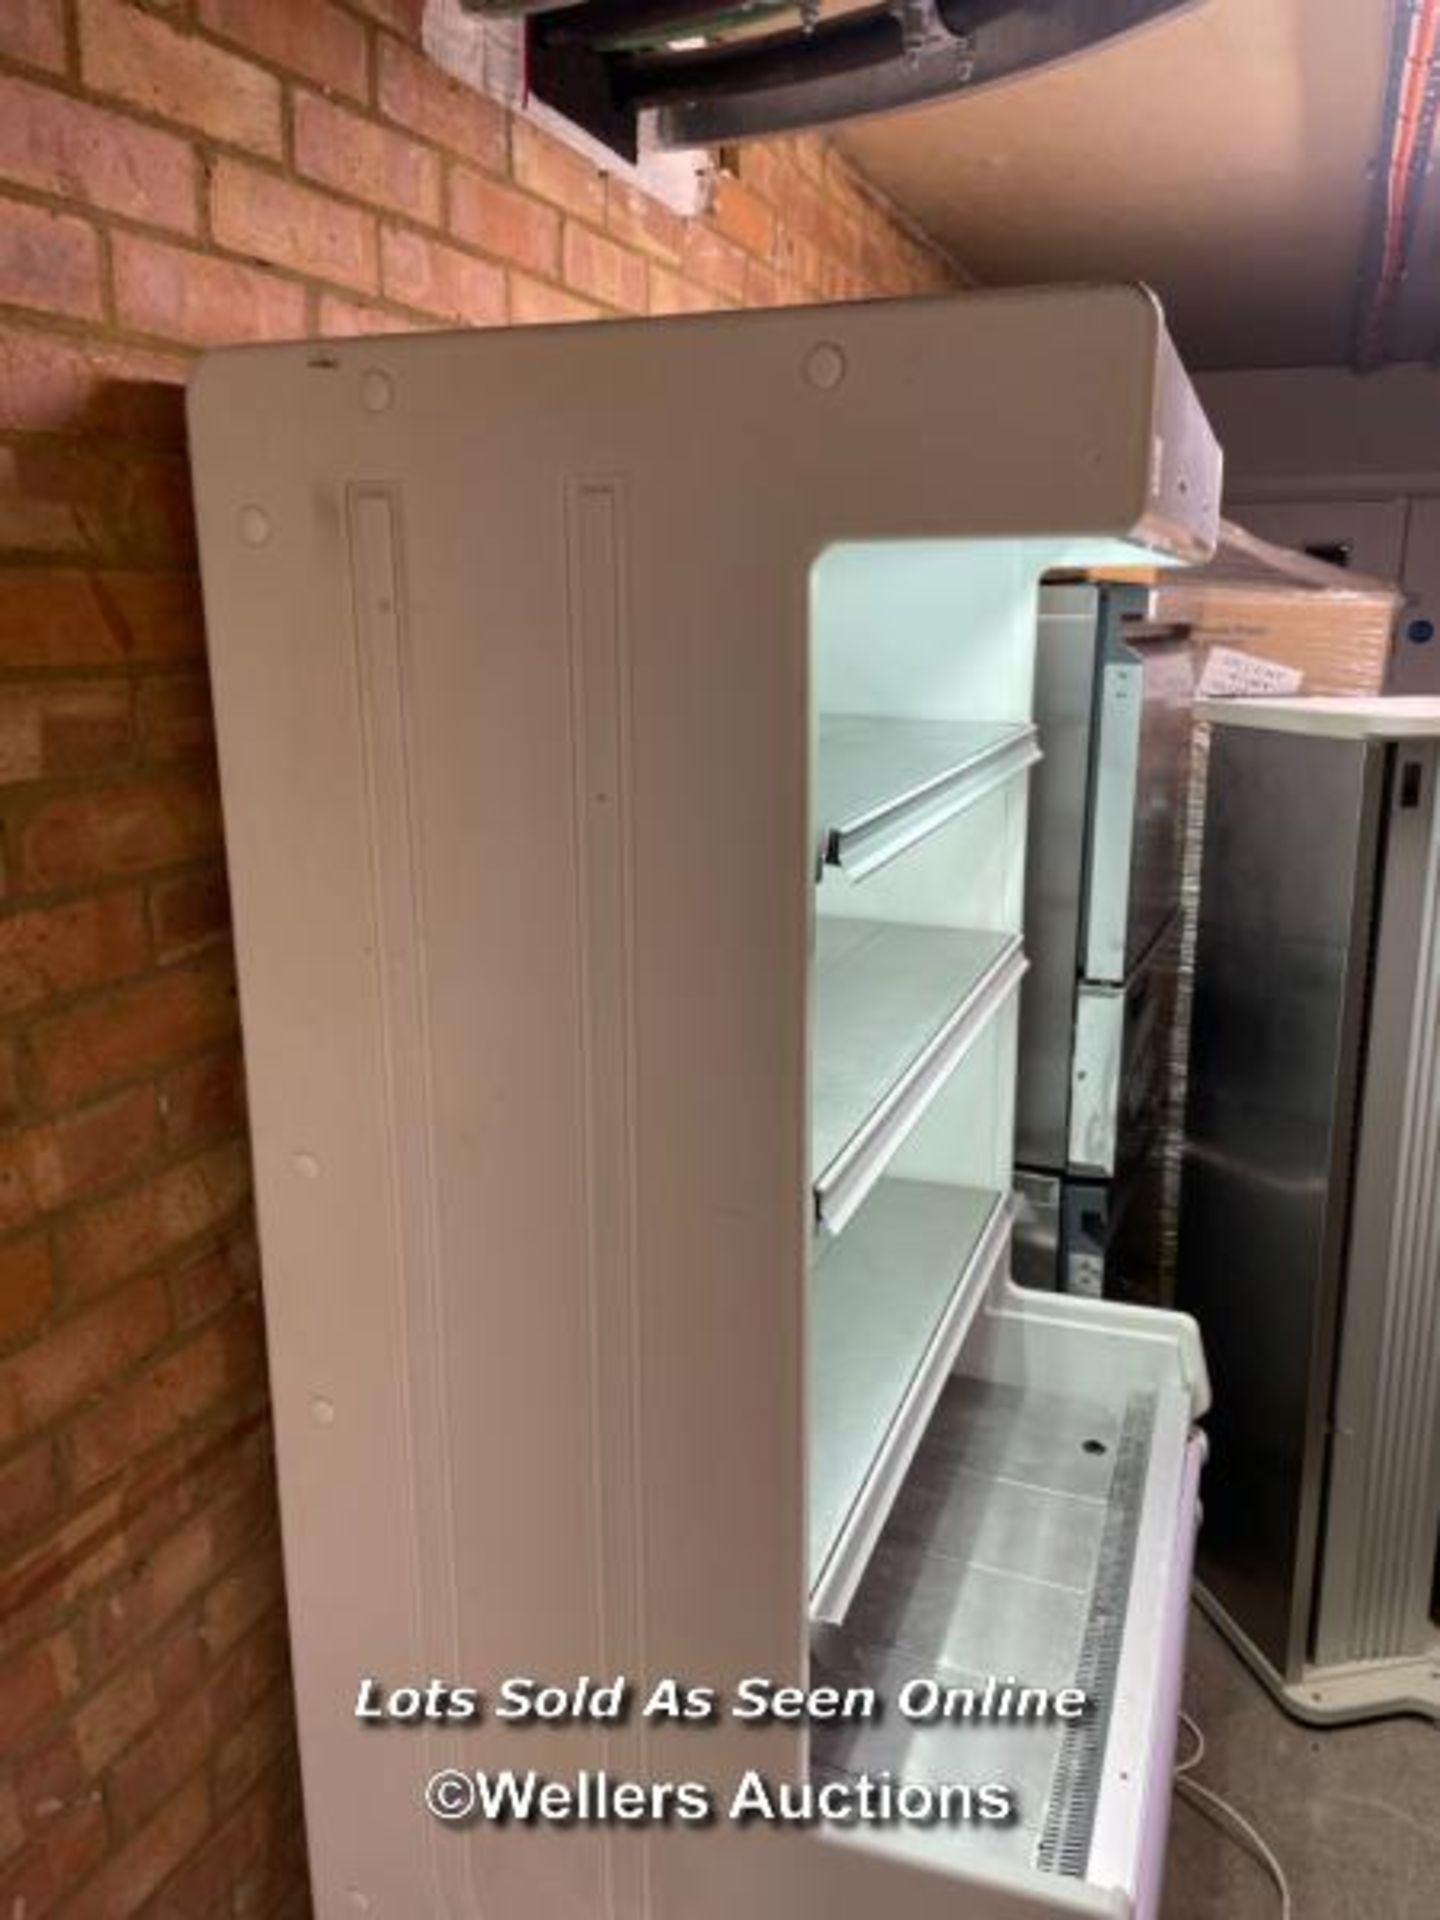 ZION DC10B DISPLAY FRIDGE - 182CM H X 100CM W X 76CM D / THE LOTS IN THIS AUCTION ARE LOCATED IN - Image 3 of 4